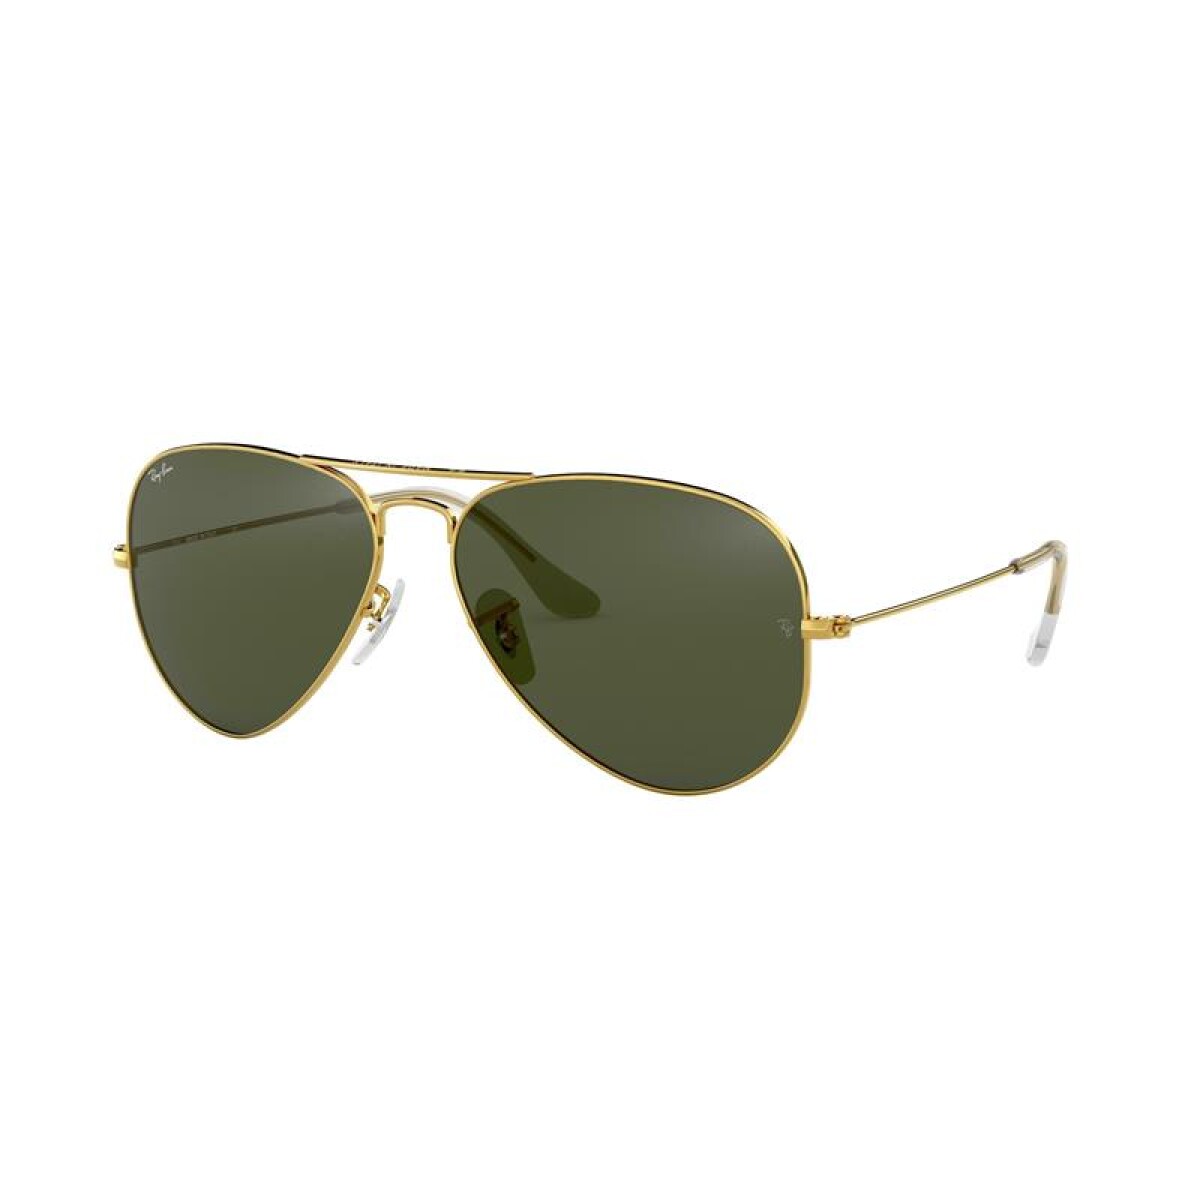 Ray Ban Rb3025 - L0205 